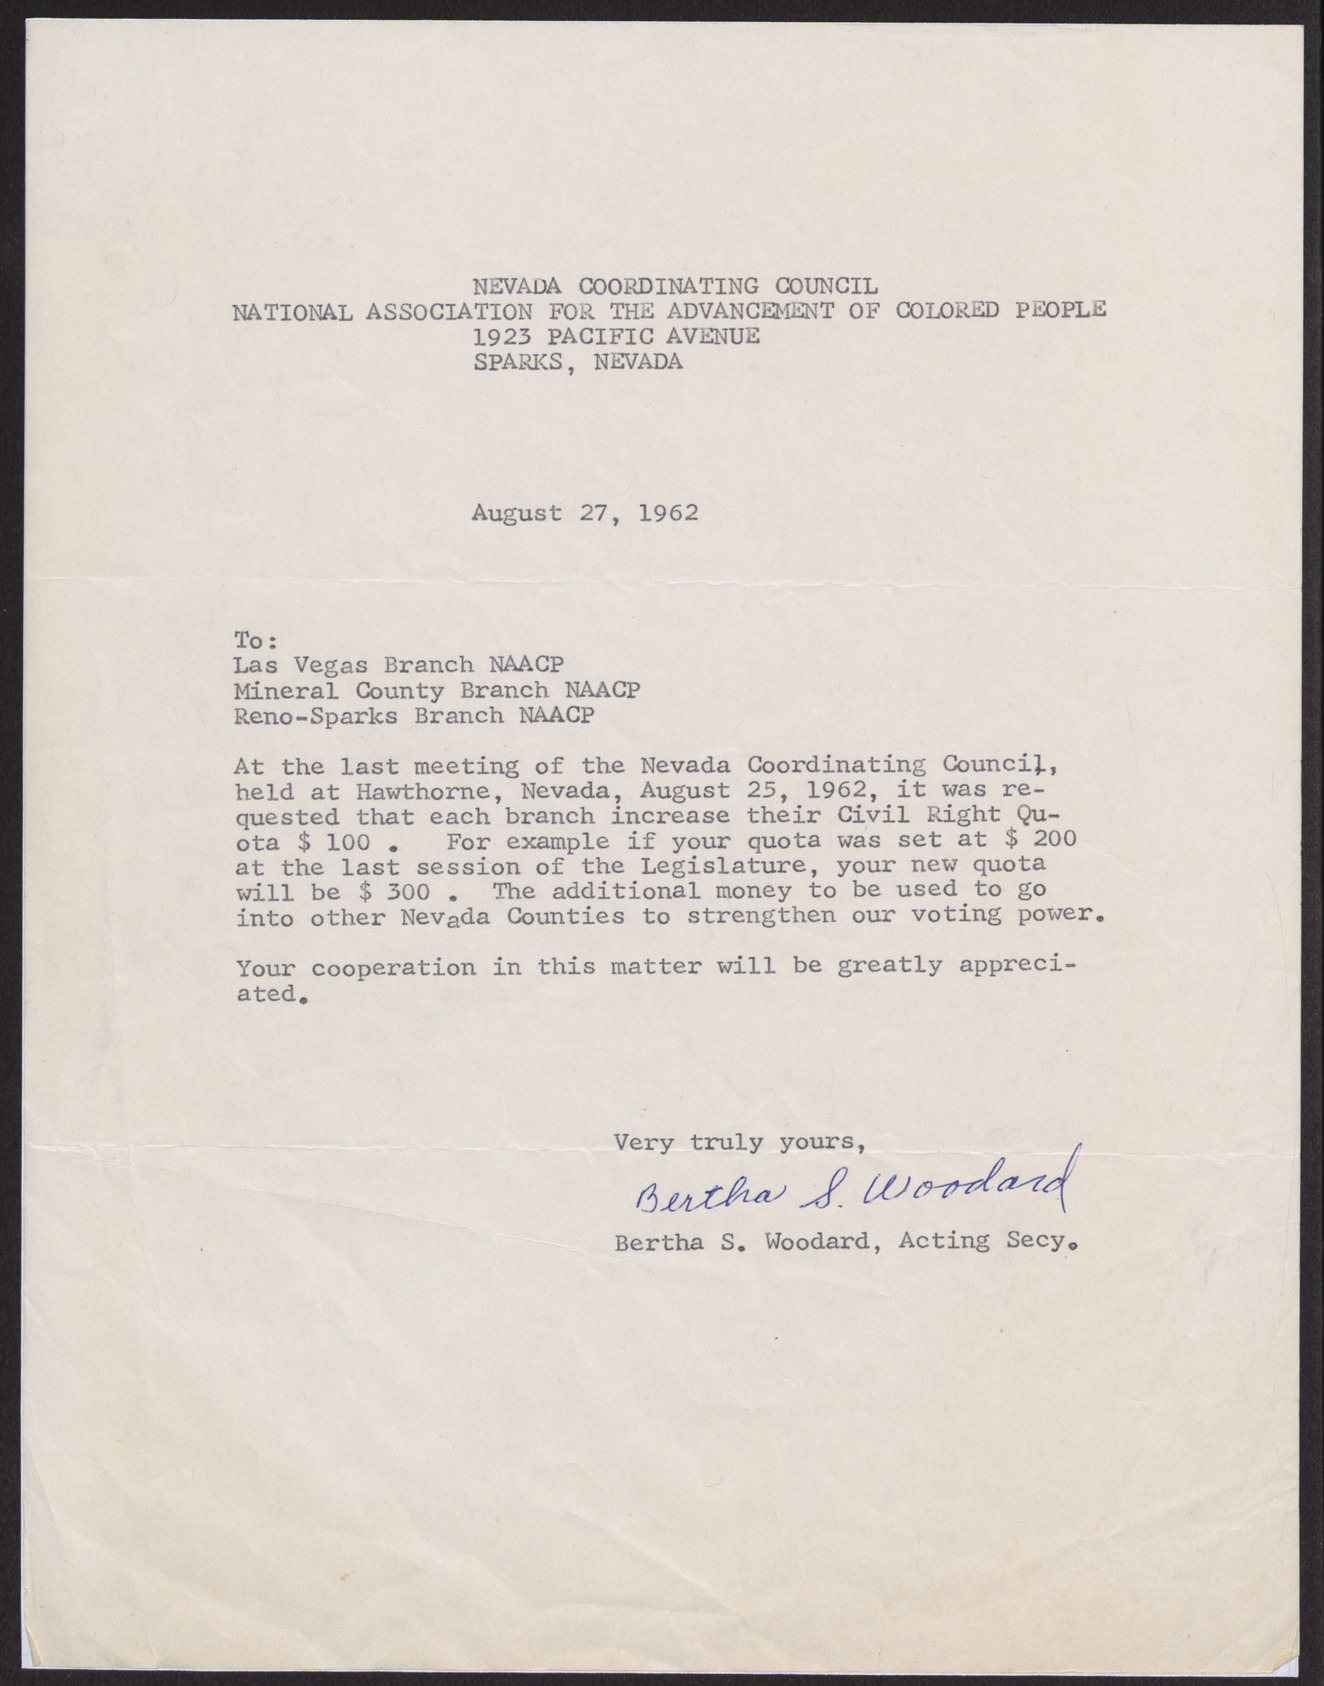 Letter to the NAACP Las Vegas Branch from the Reno-Sparks NAACP branch, August 27, 1962